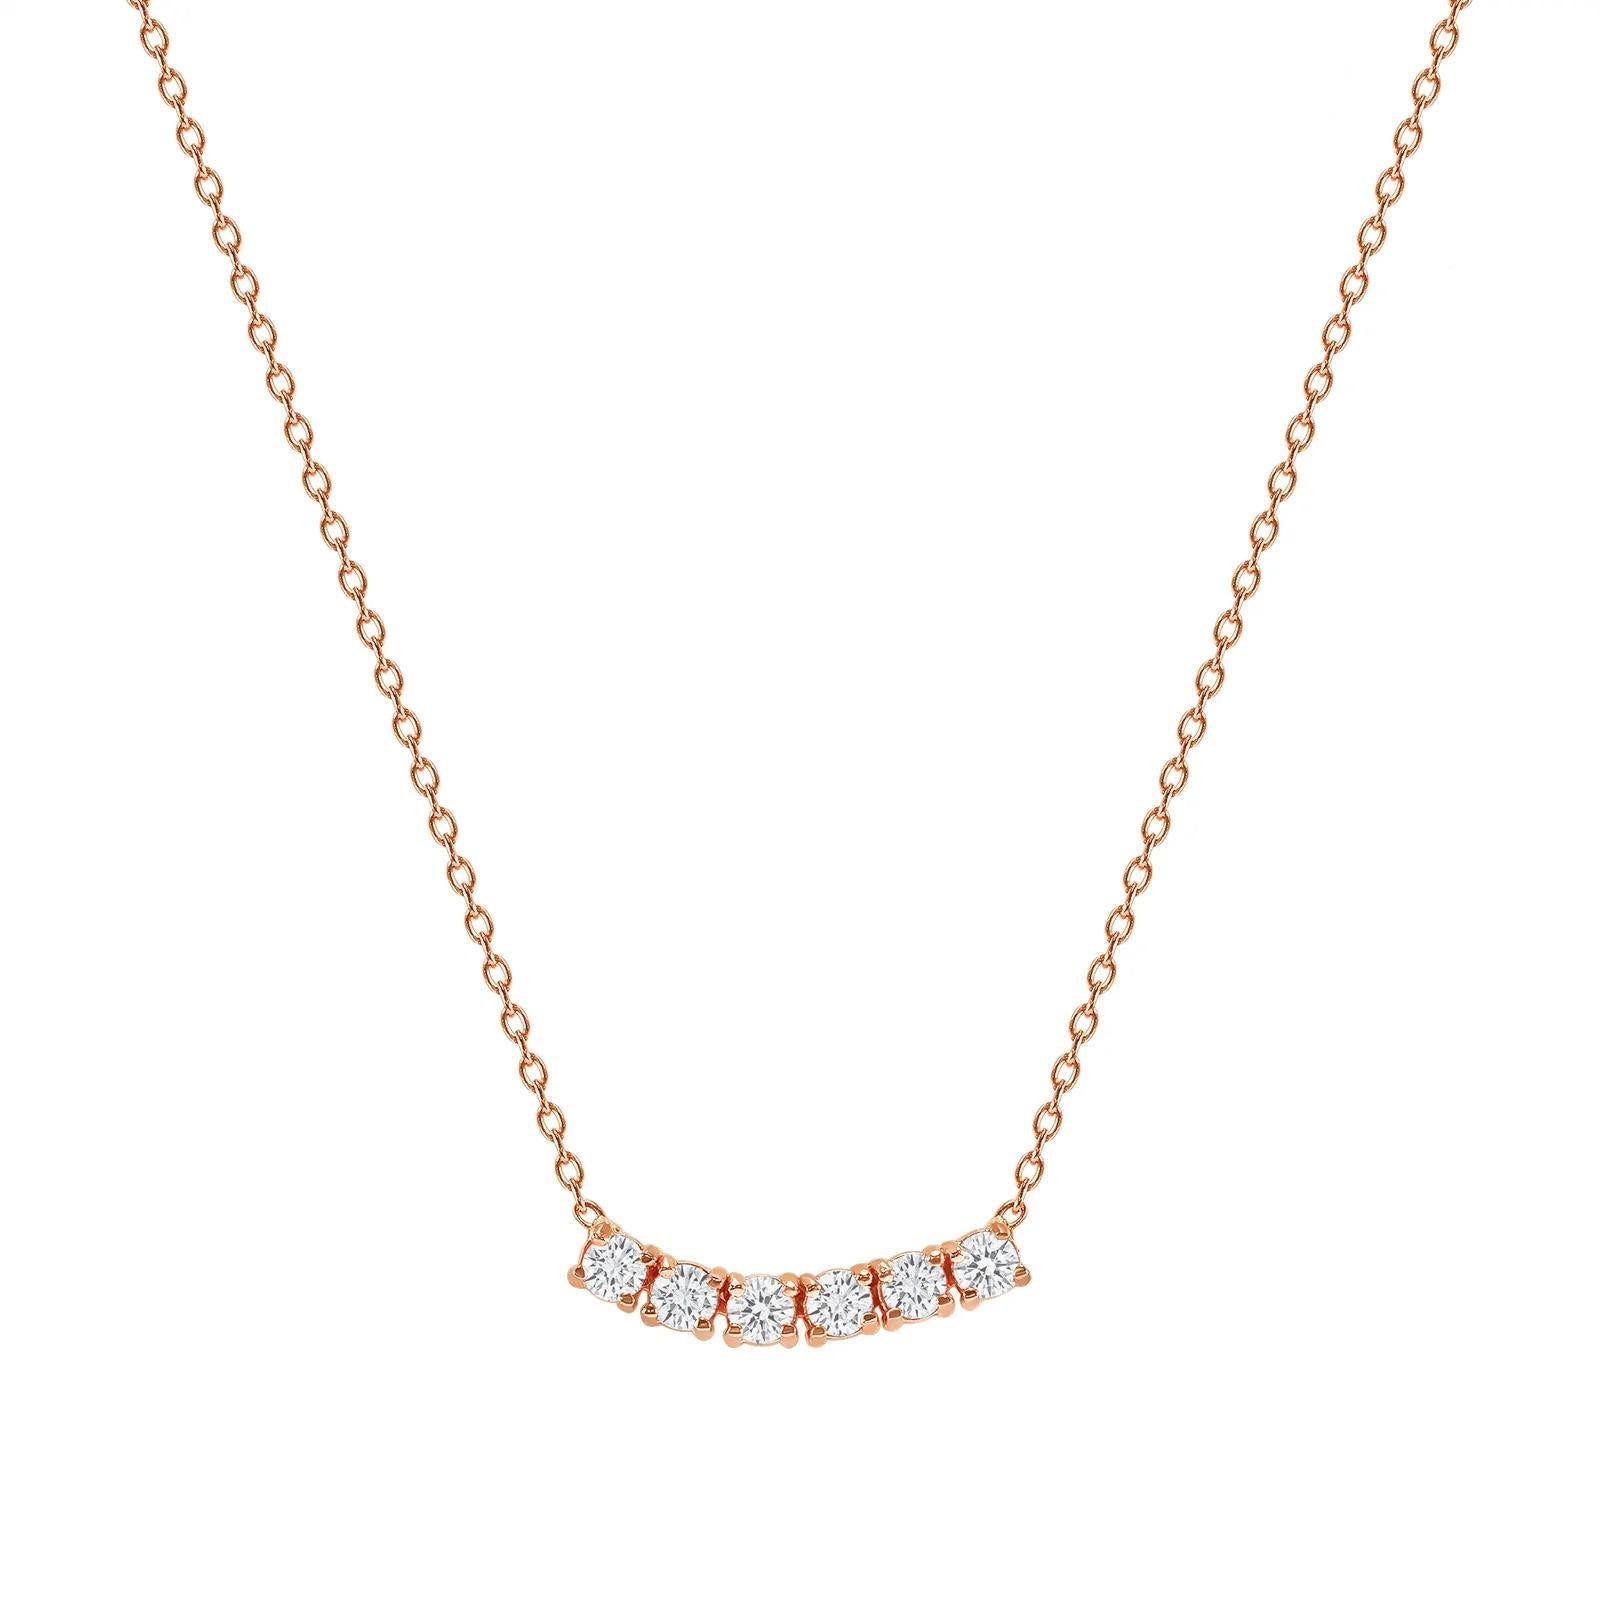 This petite, curved diamond necklace is crafted with gorgeous 14k gold set with six round diamonds.  

Gold: 14k 
Diamond Total Carats: 1.5 ct
Diamond Cut: Round (6 diamonds)
Diamond Clarity: VS
Diamond Color: F
Color: Rose Gold
Necklace Length: 18